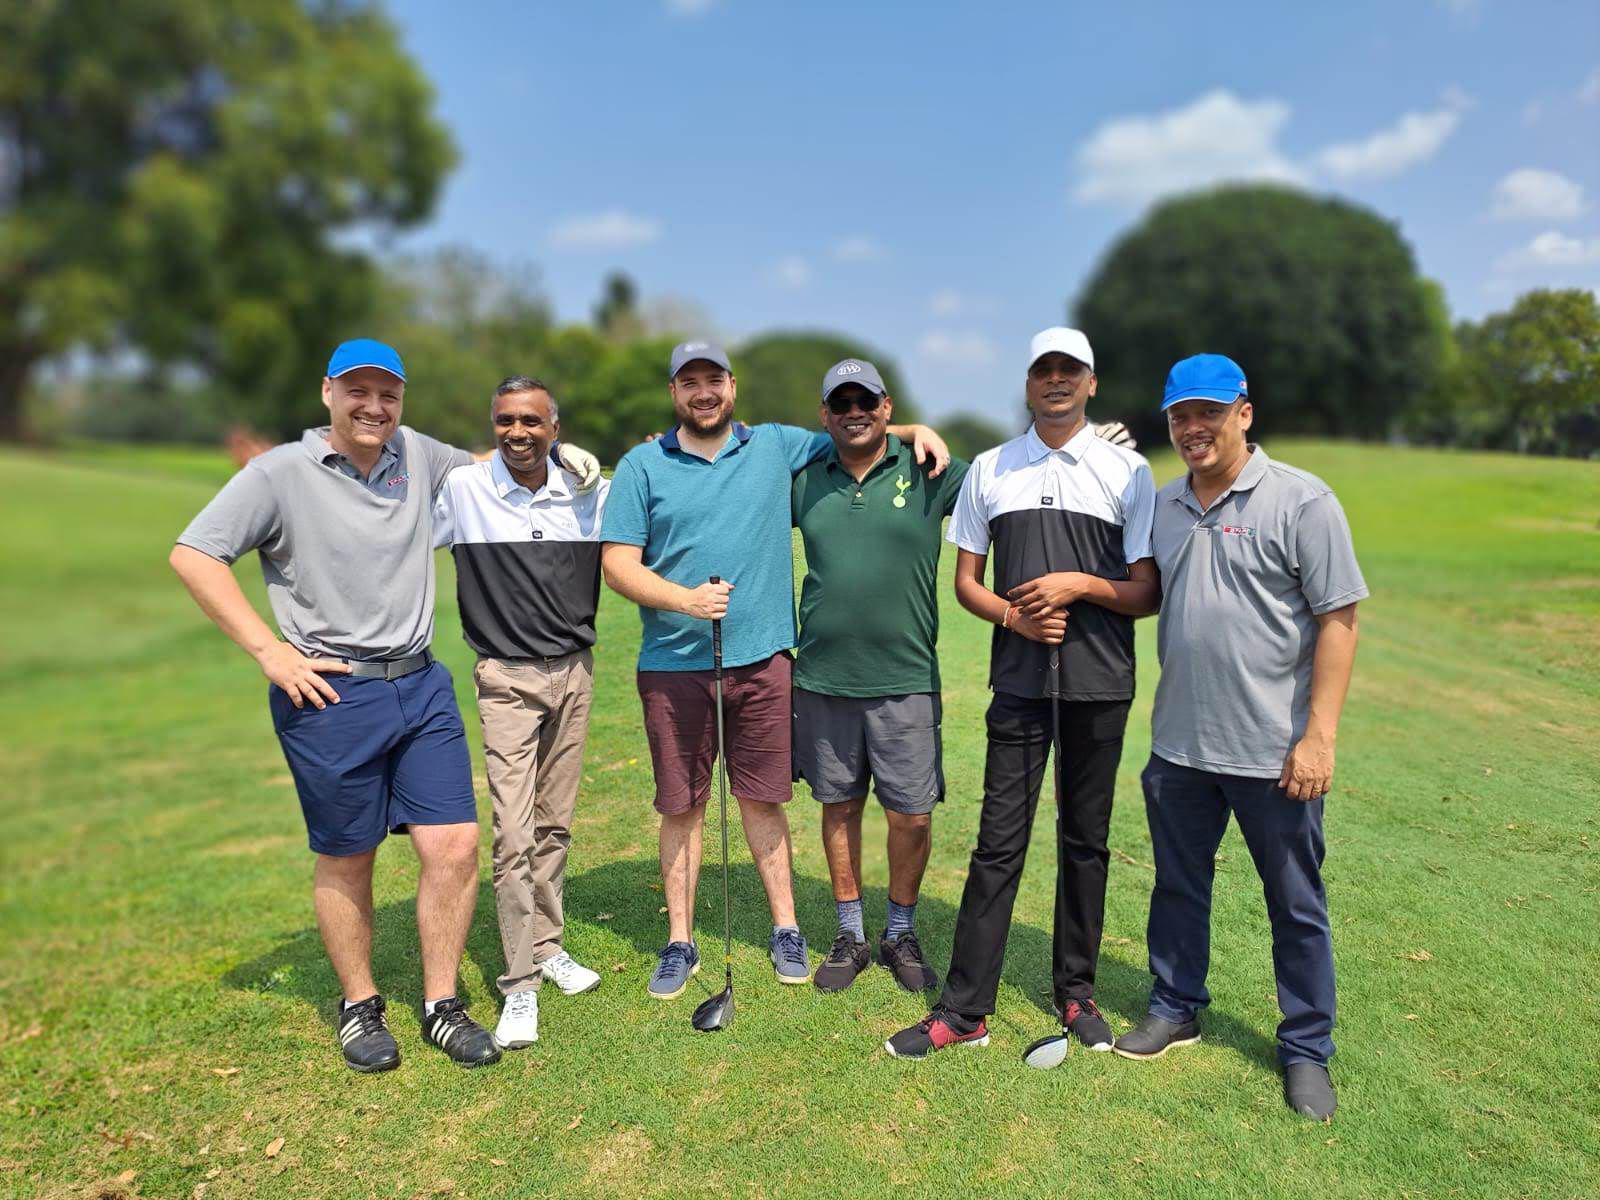 Complementary Colors, Ball Game, Sport, Golfing, Person, Ball, Face, Group, Frontal Face, Male, Adult, Beard, Smile, Papwa Sewgolum Golf Course, 256 New Germany Rd, Recreation, Durban, 4090